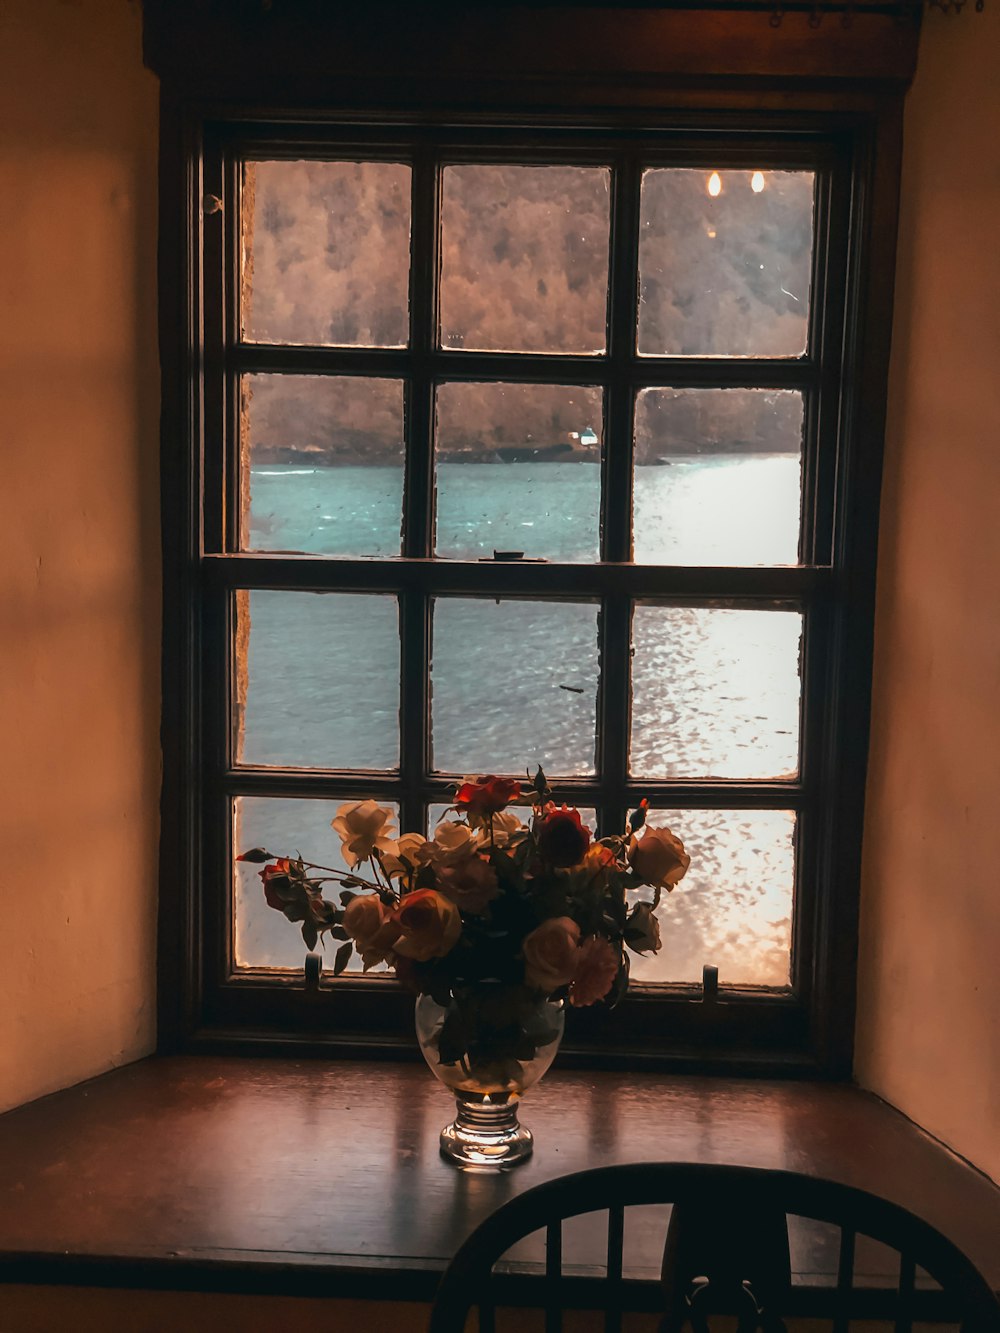 white and red rose flowers in vase near closed window viewing body of water